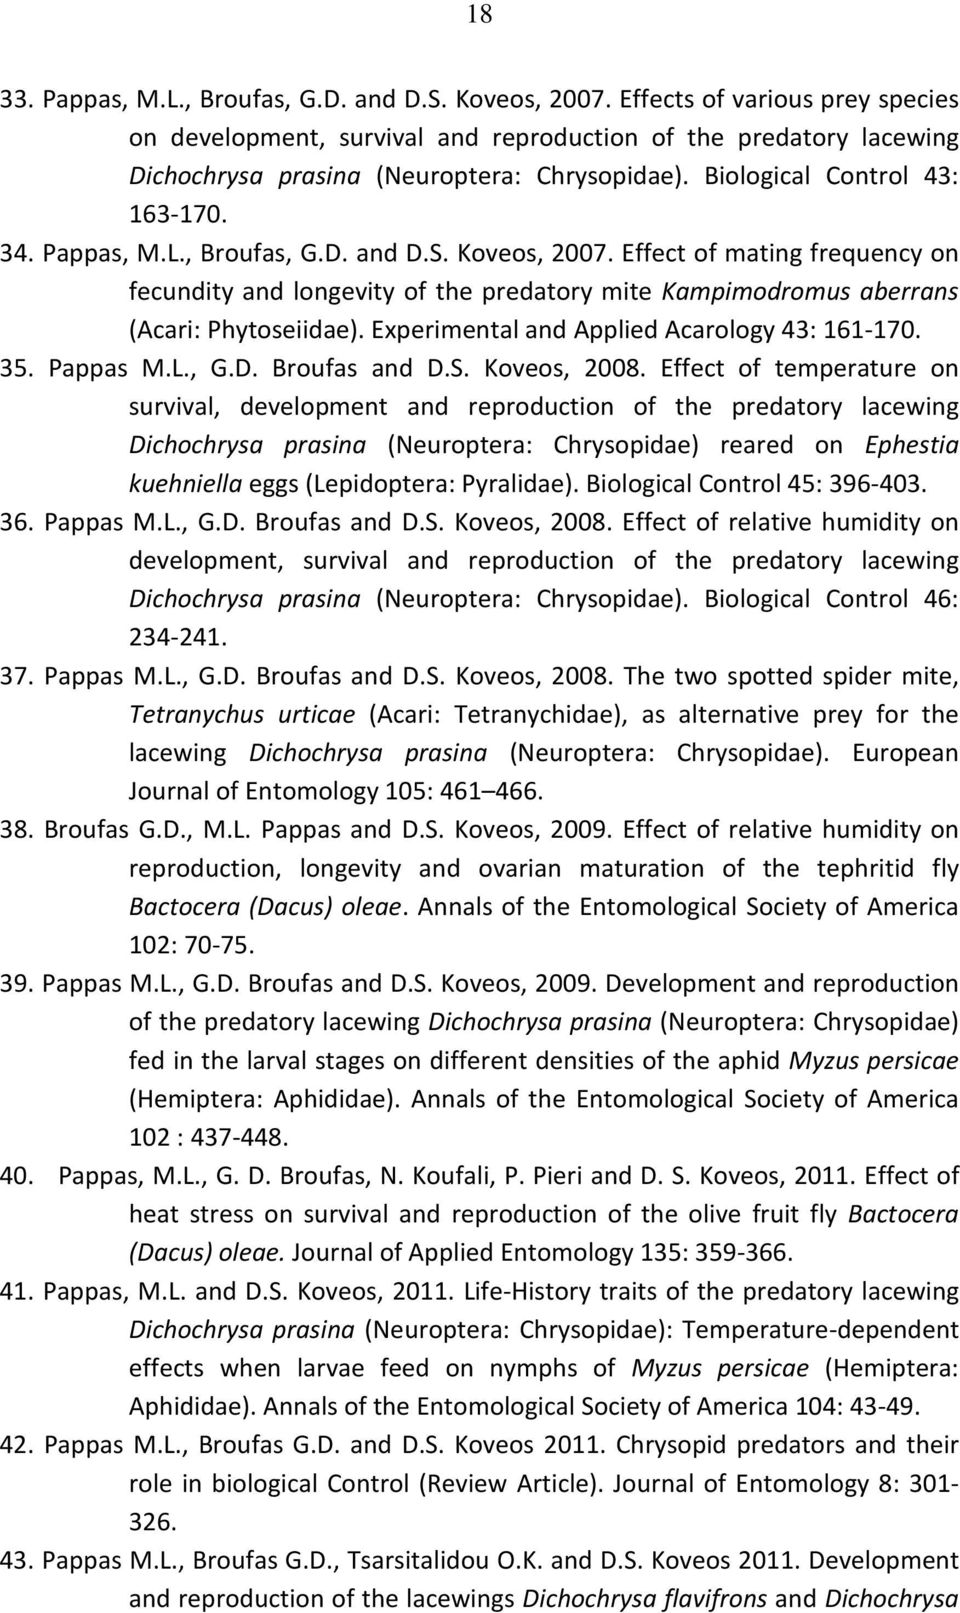 , Broufas, G.D. and D.S. Koveos, 2007. Effect of mating frequency on fecundity and longevity of the predatory mite Kampimodromus aberrans (Acari: Phytoseiidae).